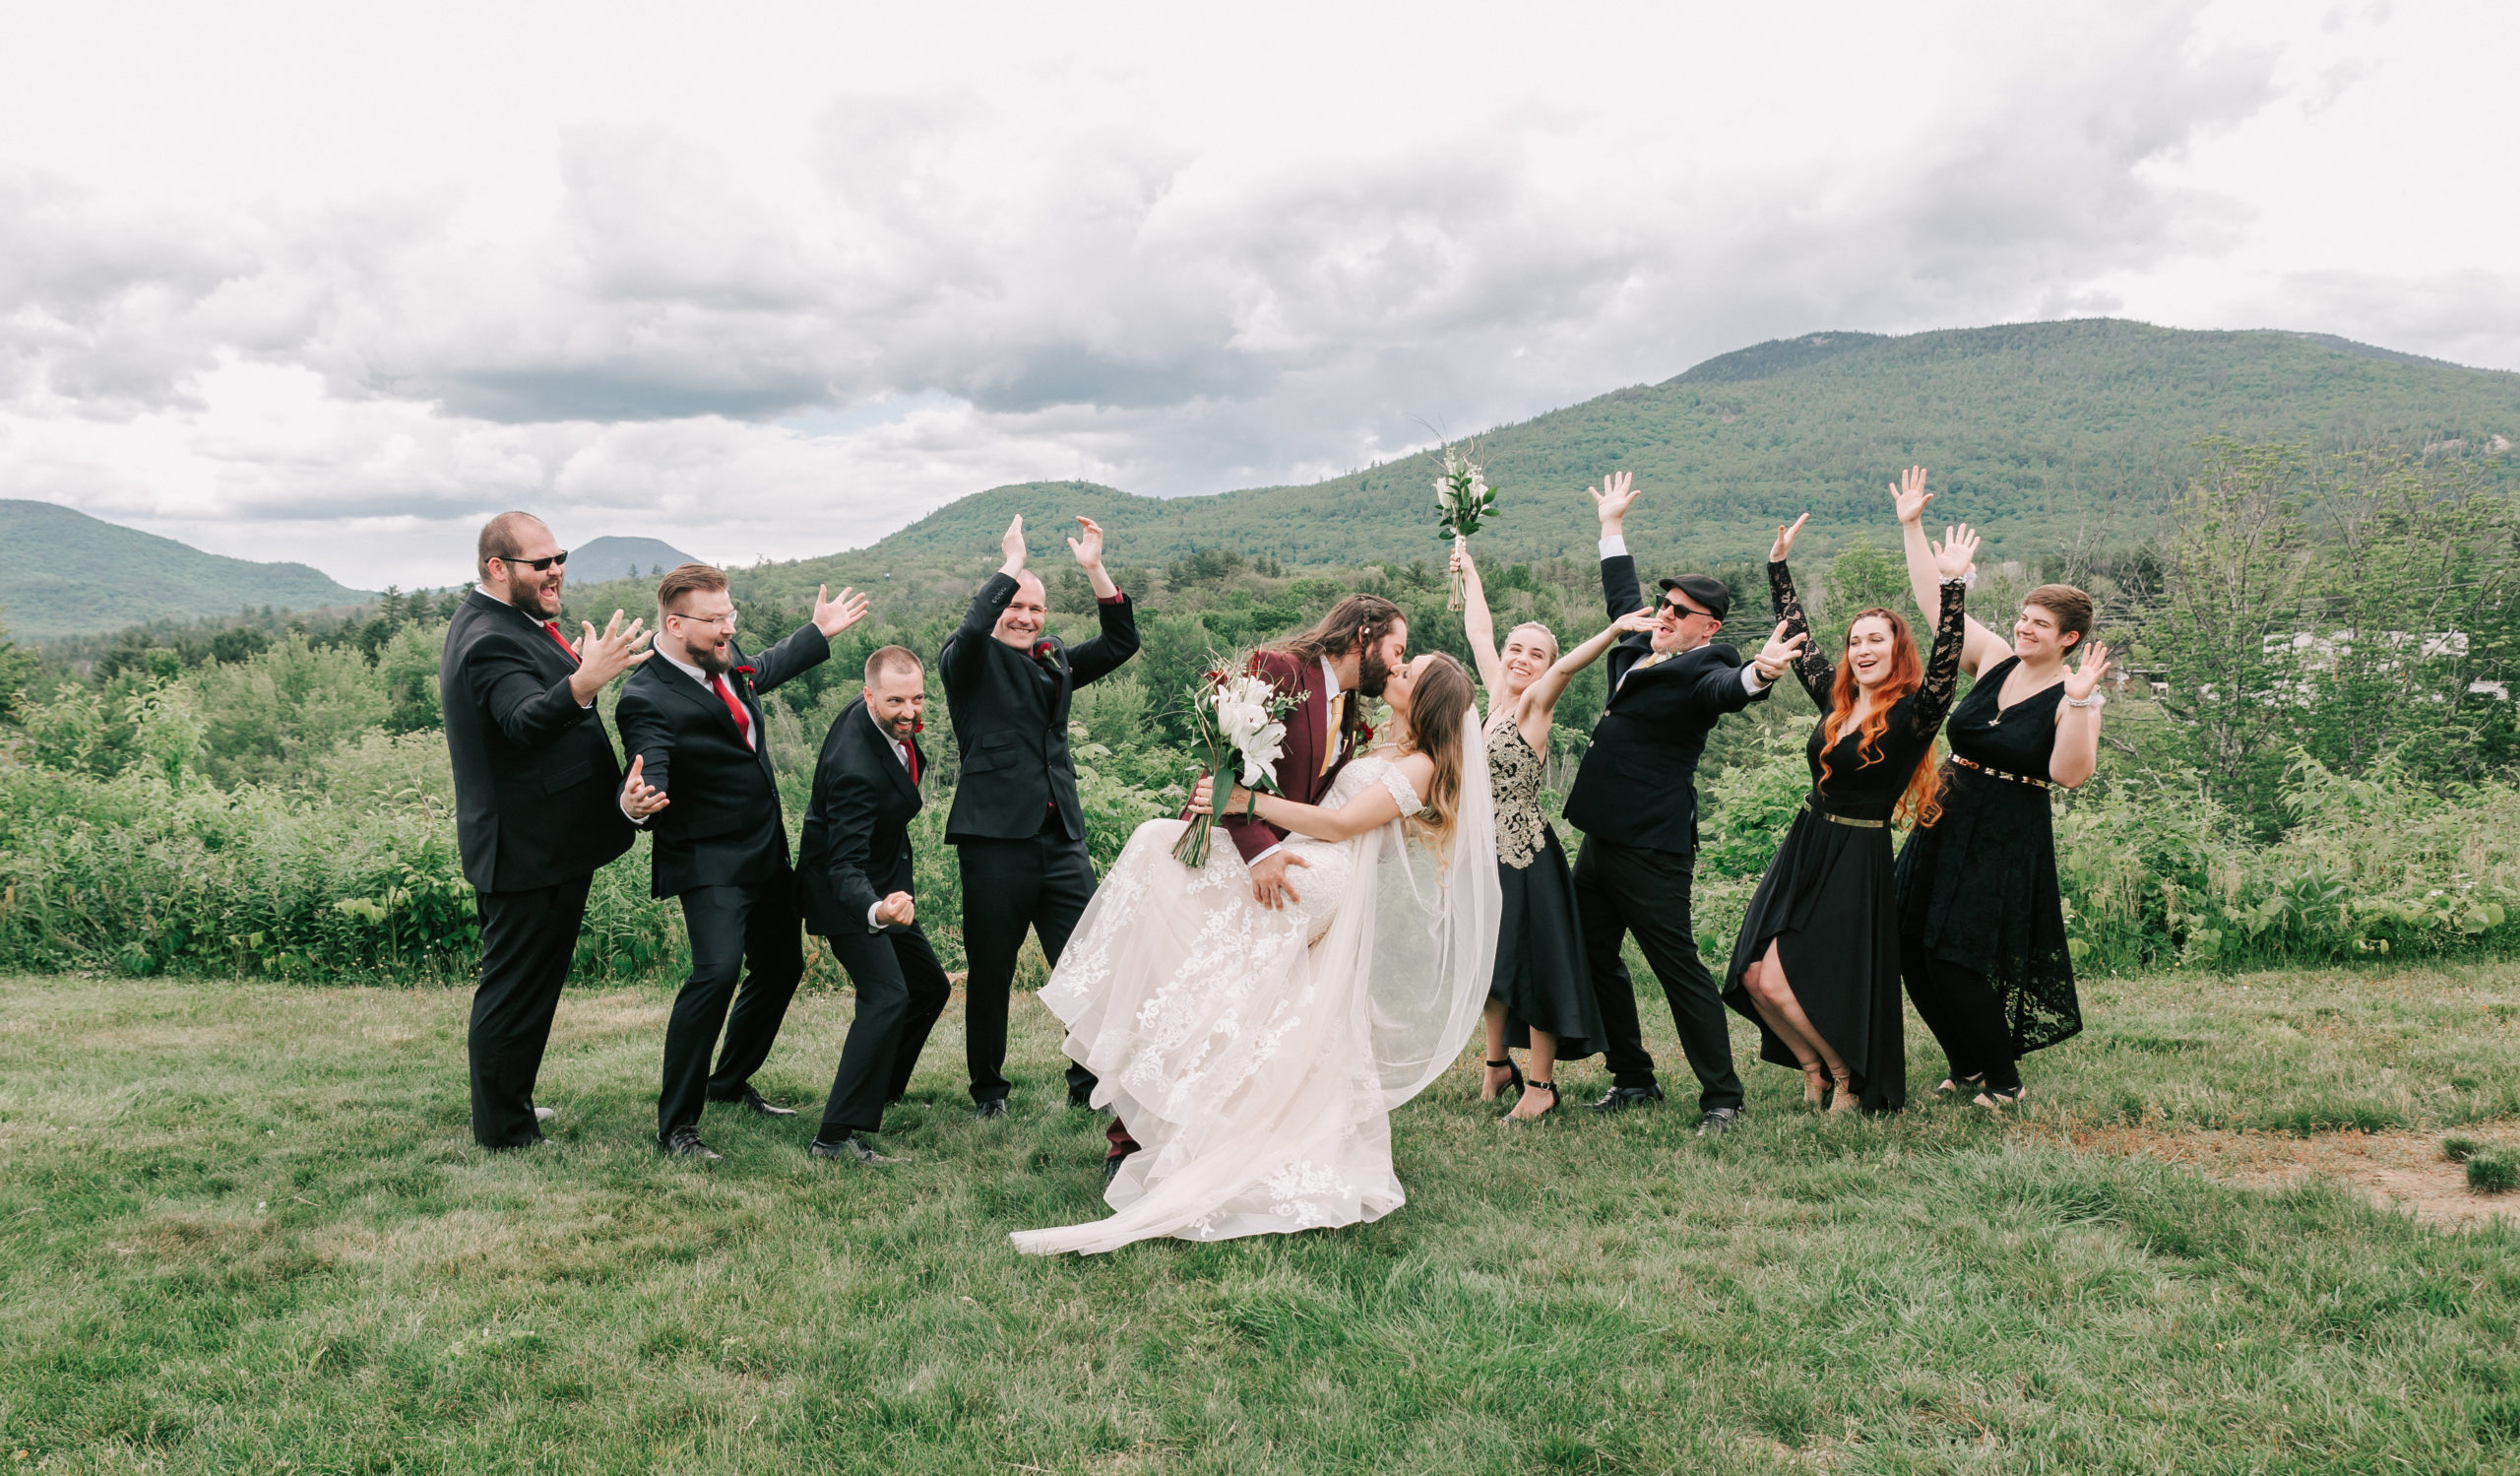 newly married couple & wedding party posing for a fun photo at a White Mountains wedding